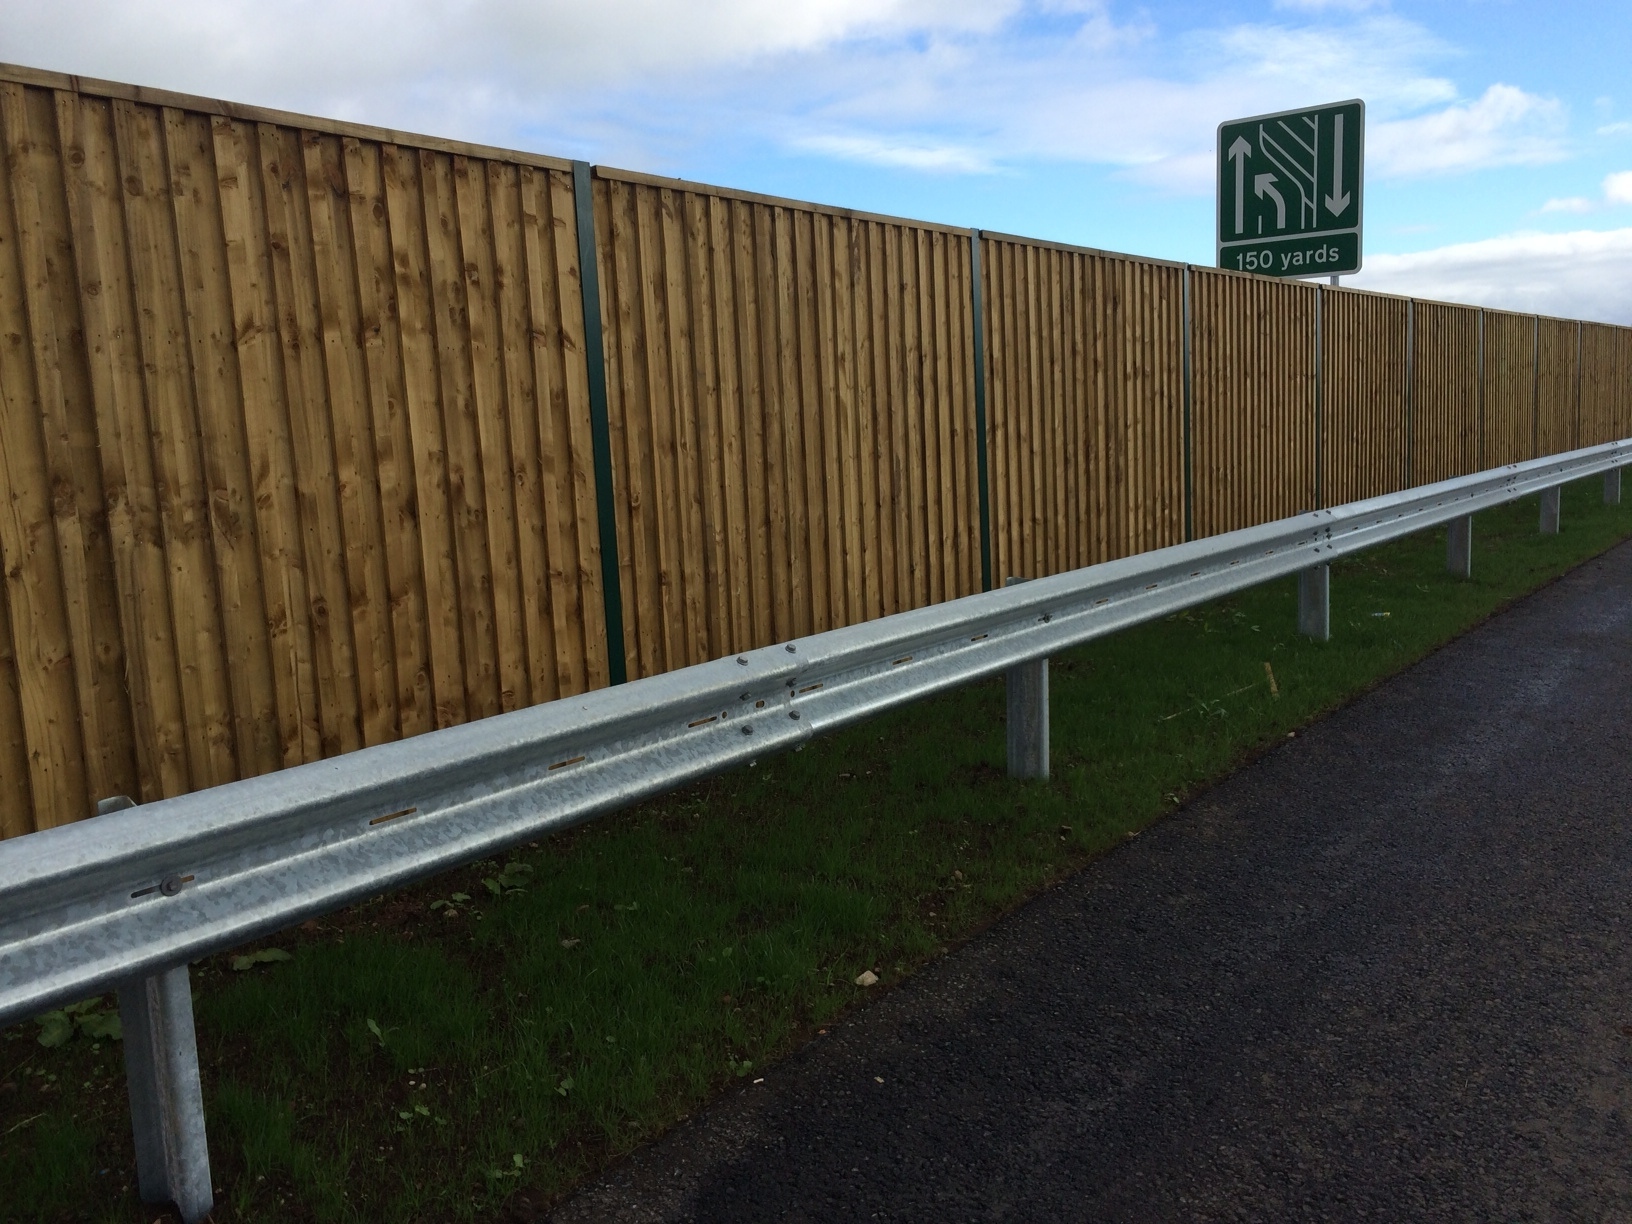 Acoustic reflective barrier